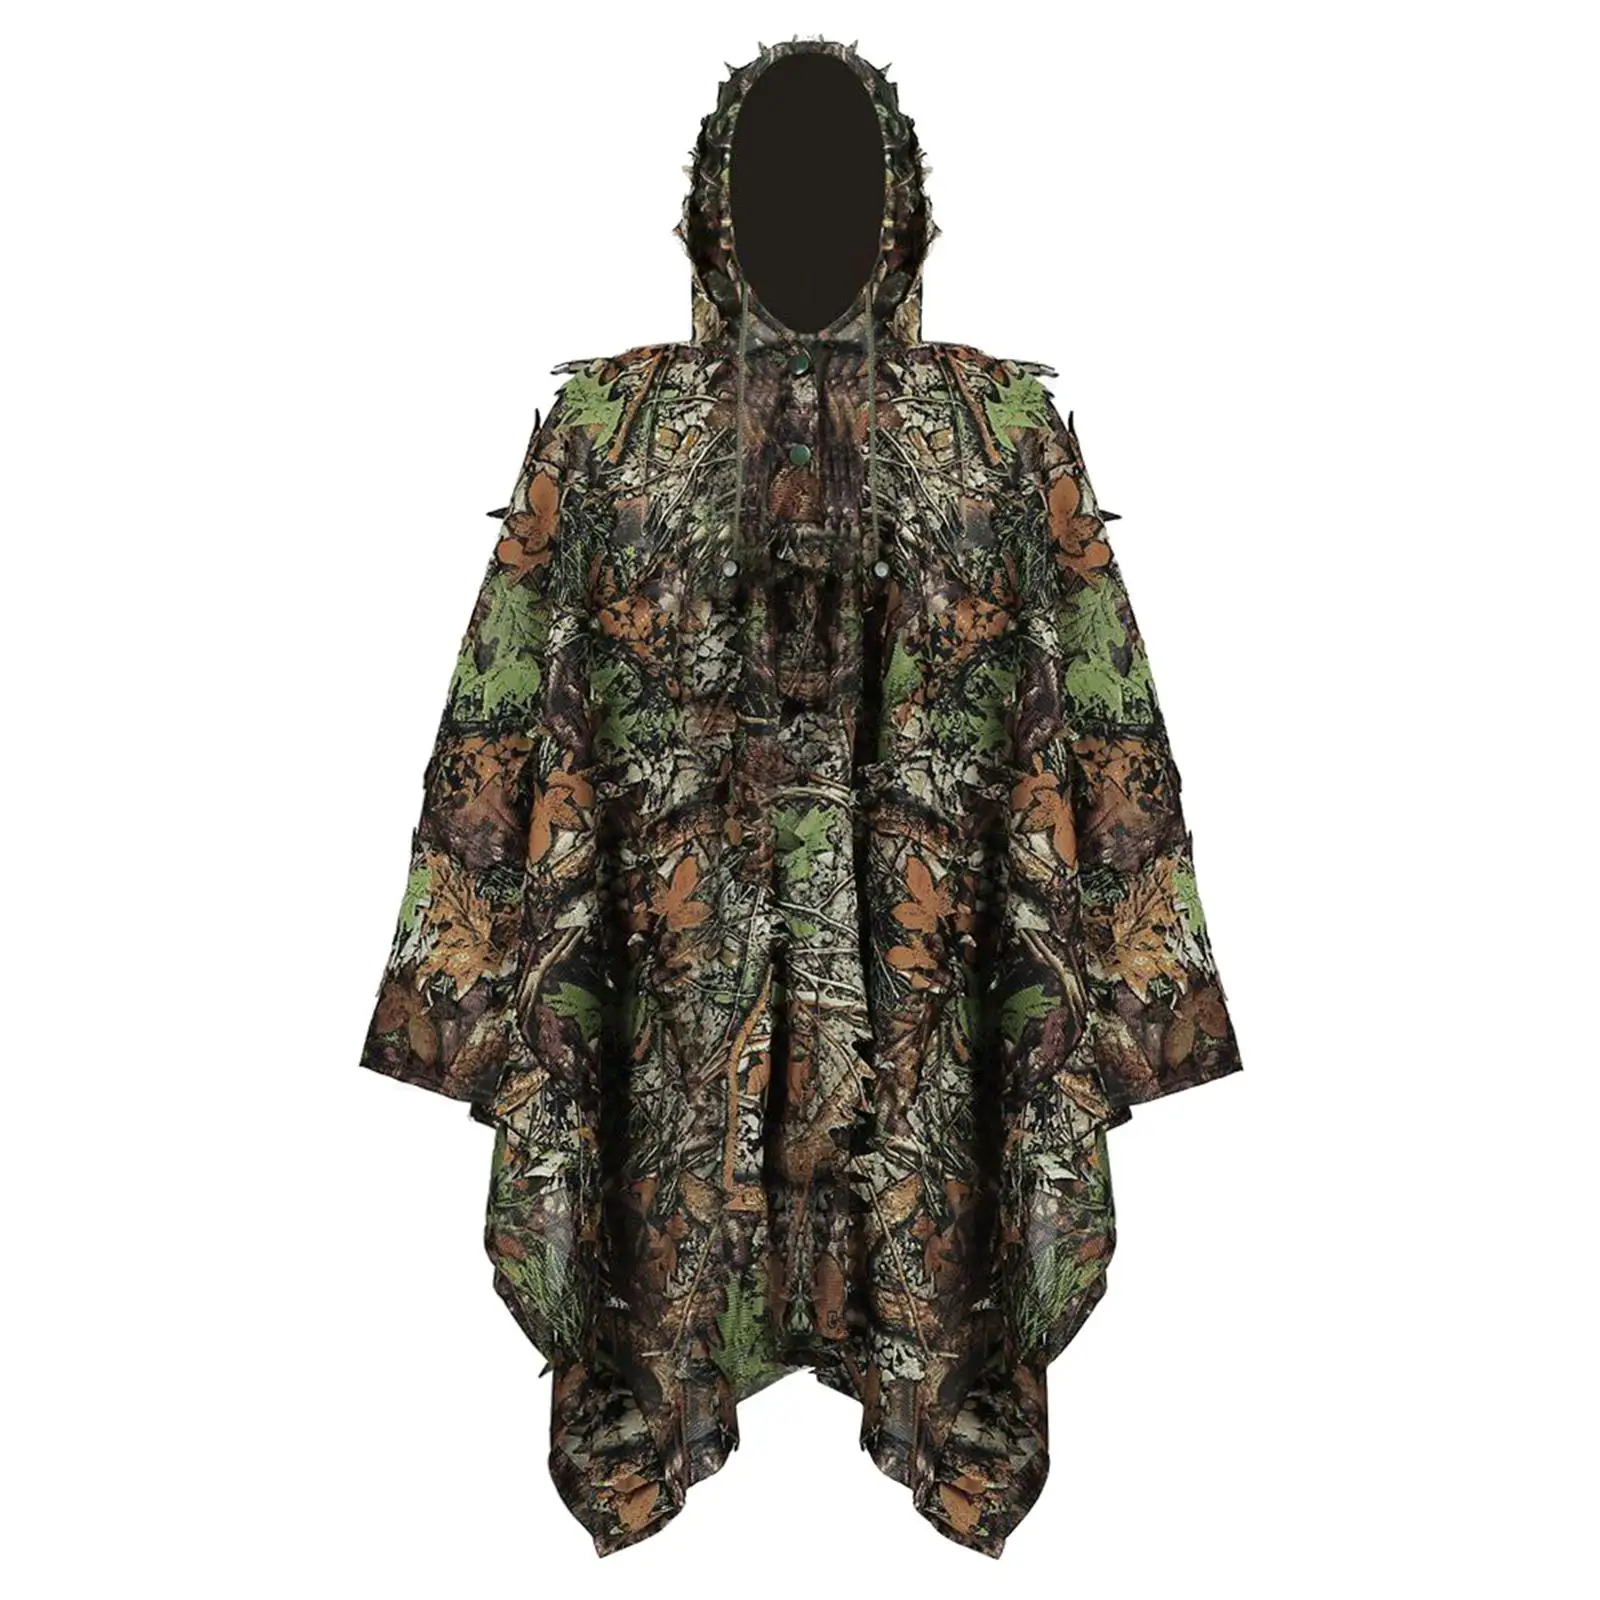 Ghillie Suit for Men Jacket Hood Camo Suit for Hunting Halloween Photography